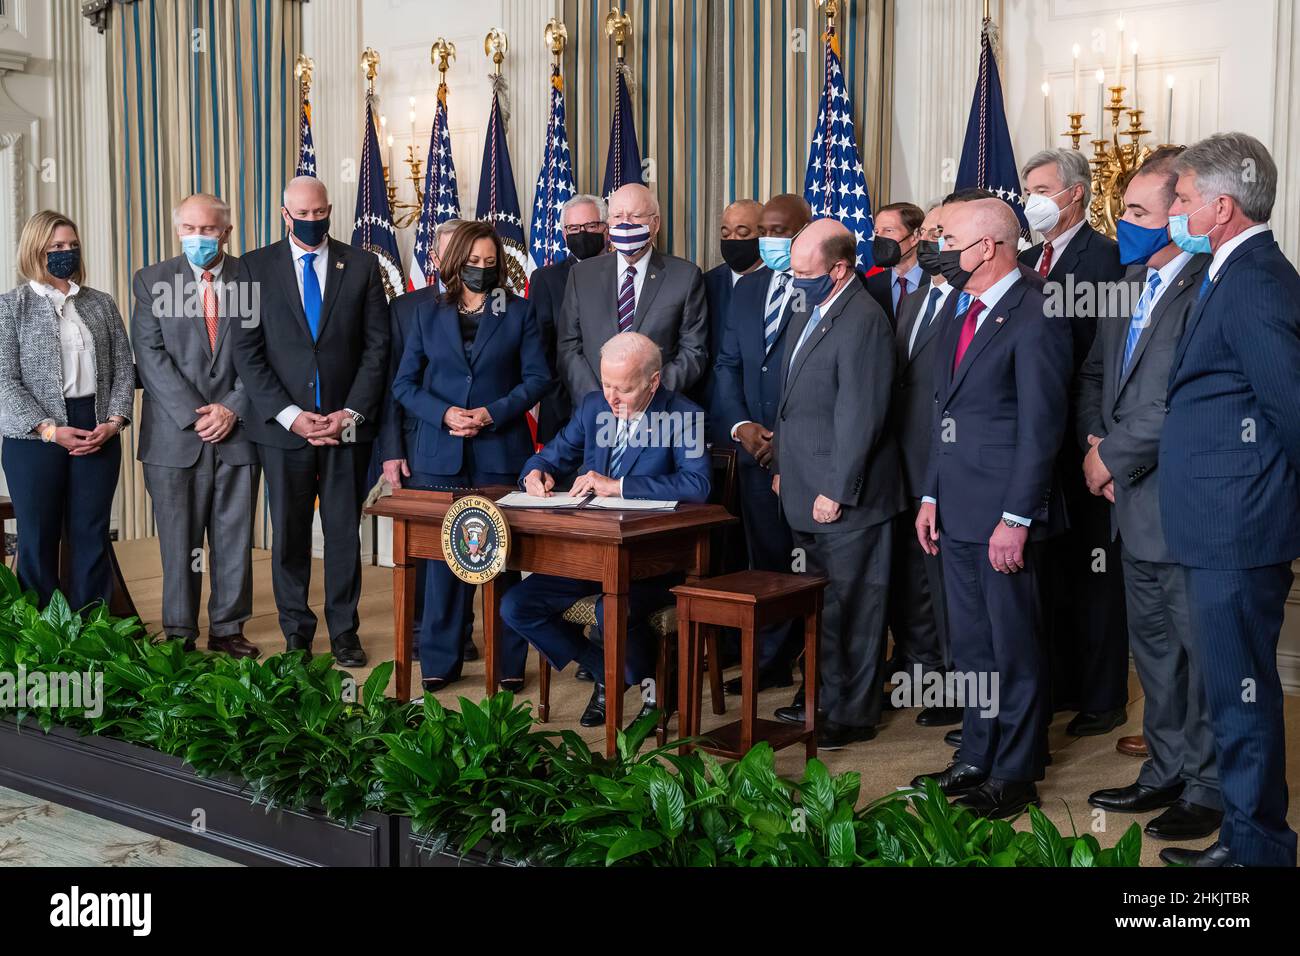 President Joe Biden signs the COPS Counseling Act, the Protecting America’s First Responders Act of 2021, and the Jaime Zapata and Victor Avila Federal Officers and Employees Protection Act, Thursday, November 18, 2021, in the State Dining Room of the White House. (Official White House Photo by Adam Schultz) Stock Photo